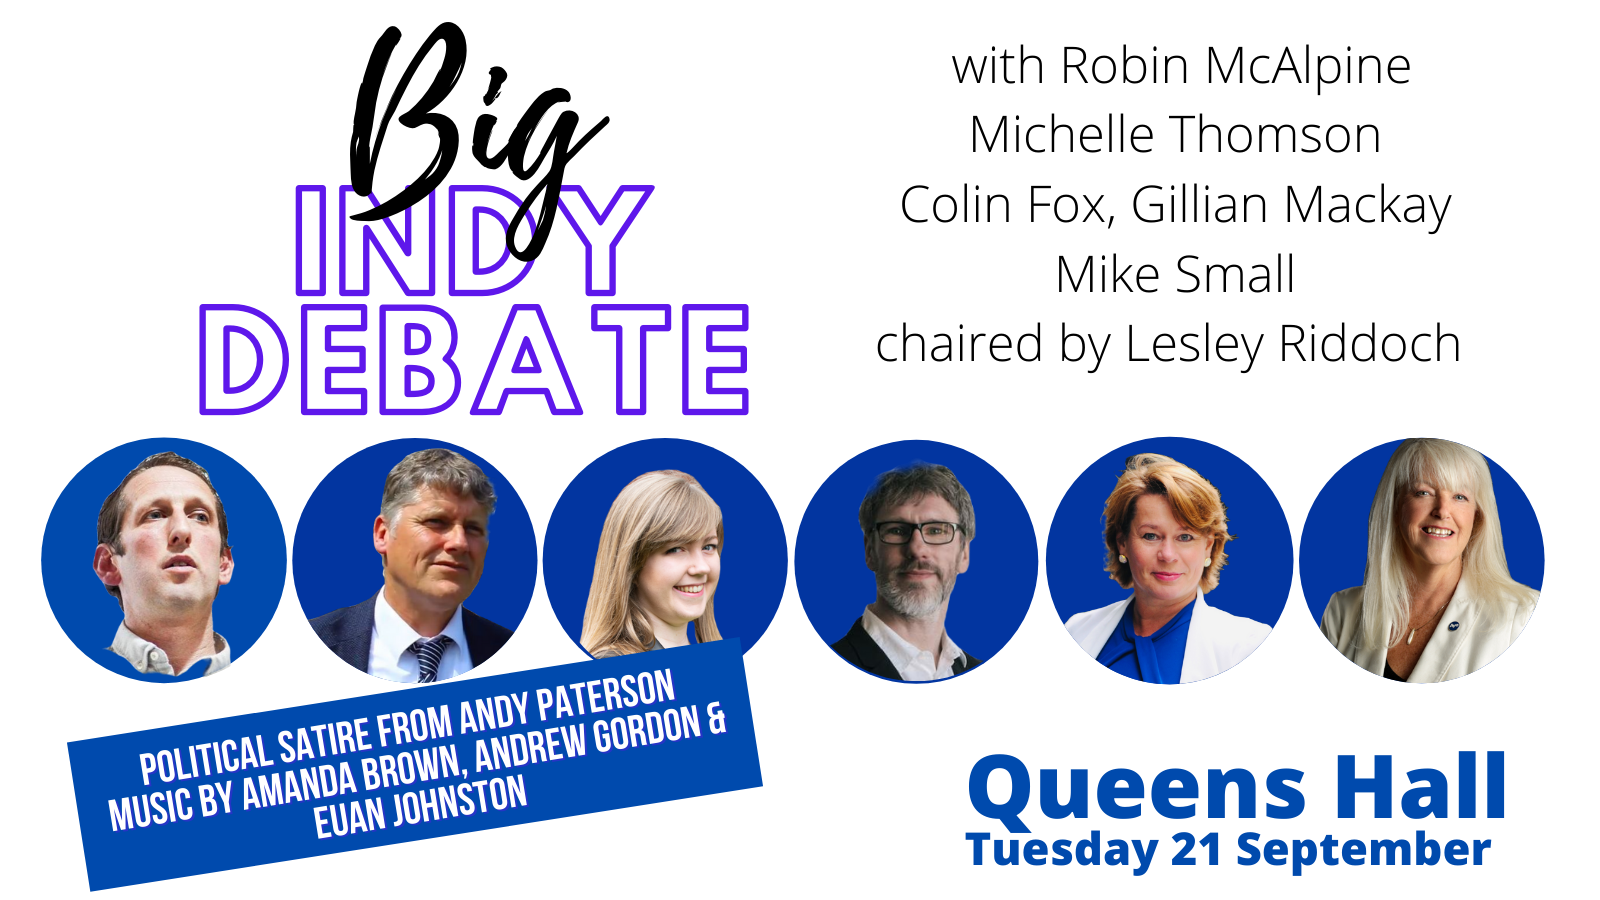 Graphic with text in various fonts reading Big Indy Debate with Robin McAlpine, Michelle Thomson, Colin Fox, Gillian Mackay, Mike Small and Selma Rehman chaired by Lesley Riddoch. Political satire from Andy Paterson. Music by Amanda Brown, Andrew Gordon and Euan Johnston. Queen's Hall. Tuesday 21 September. Photos of the part